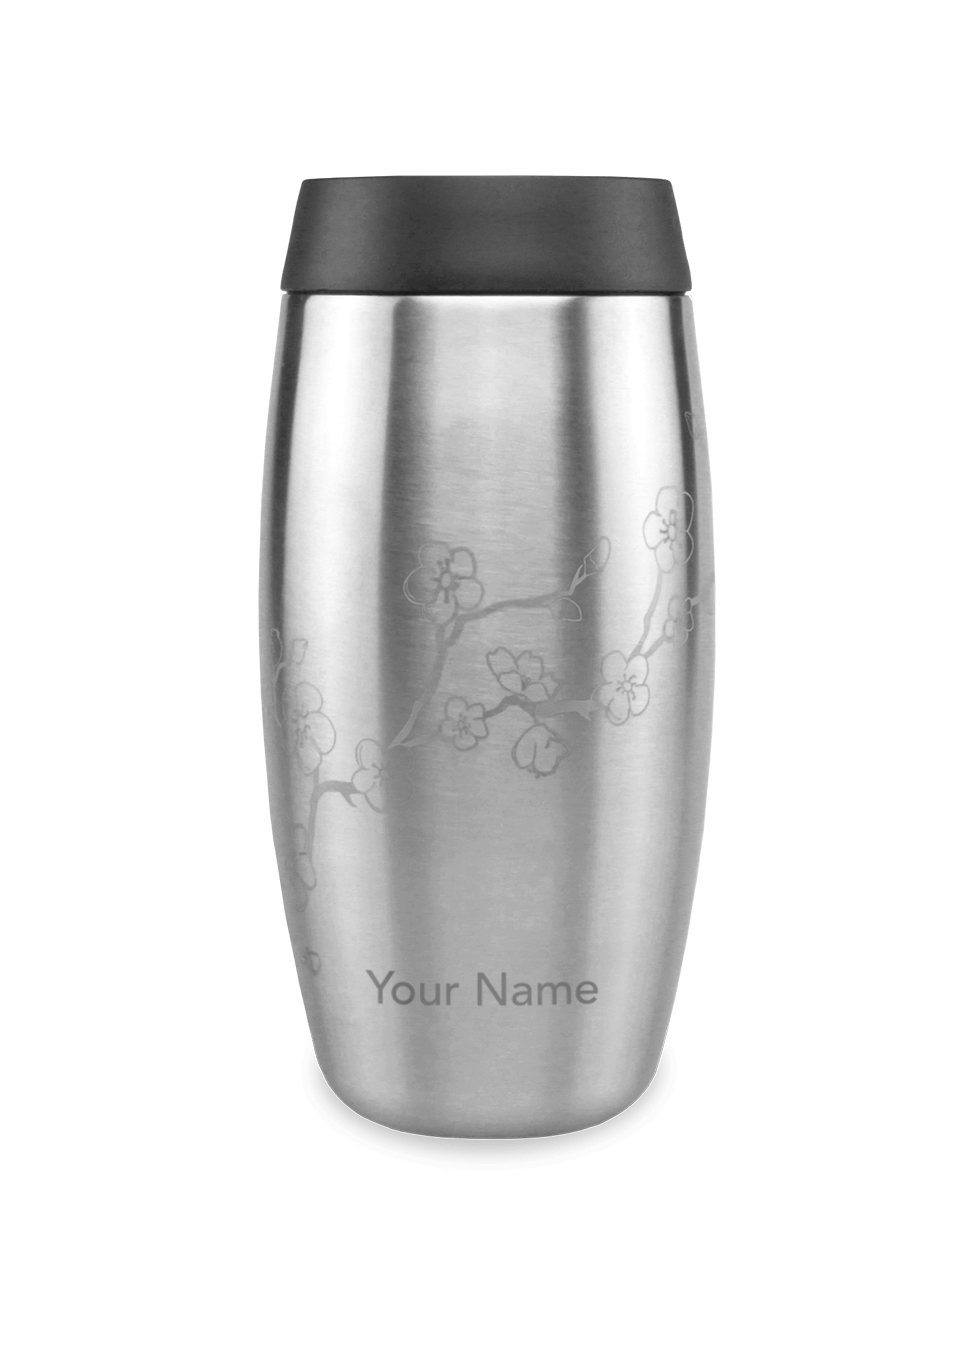 Personalised coffee flask in stainless steel wth floral design